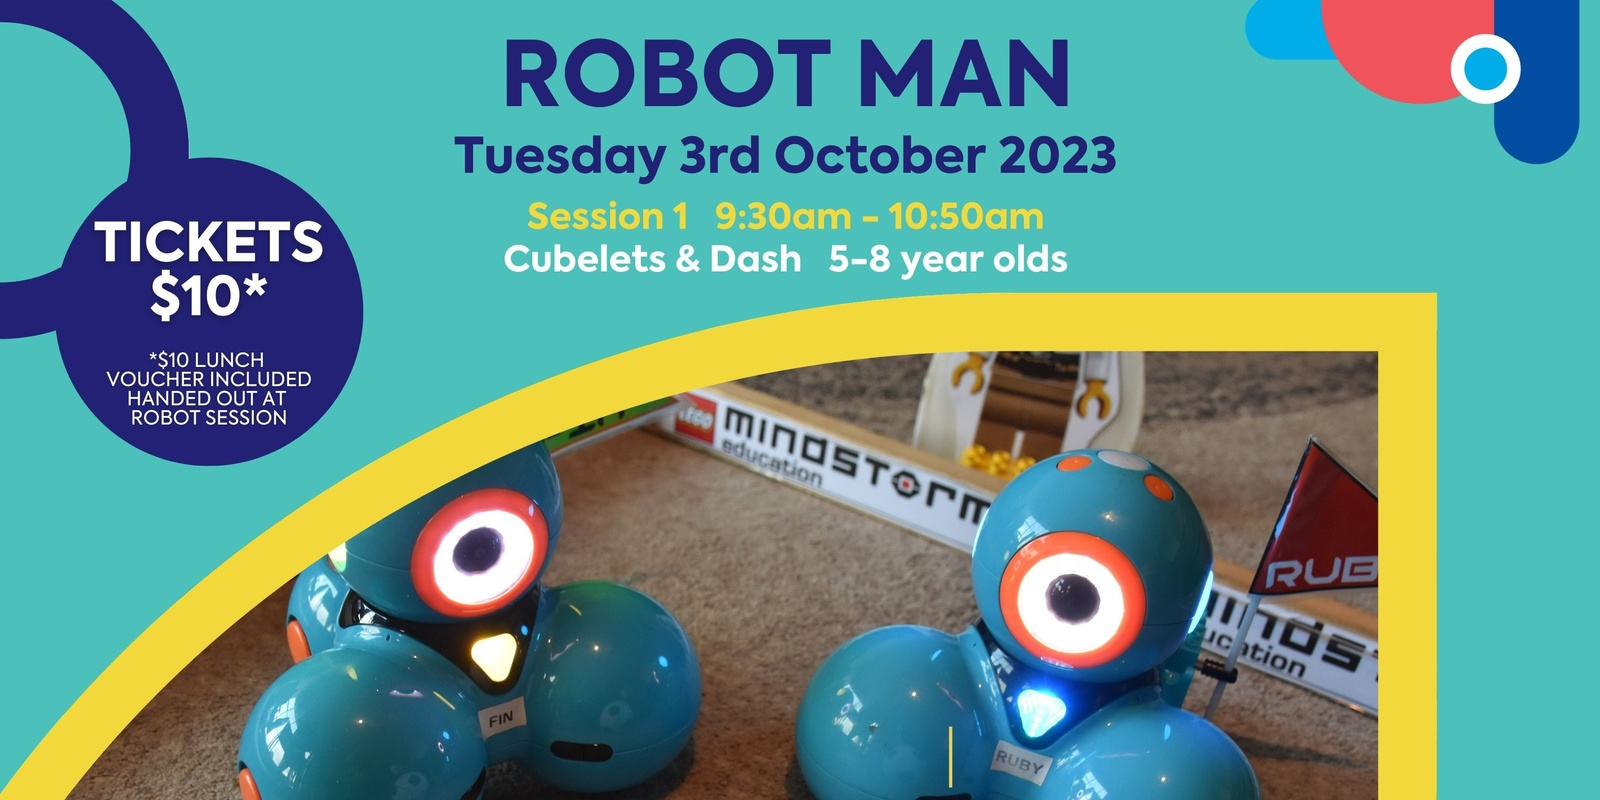 Banner image for Robot Man @ Meadow Mews Plaza - Session 1 Cubelets and Dash 5-8 yrs